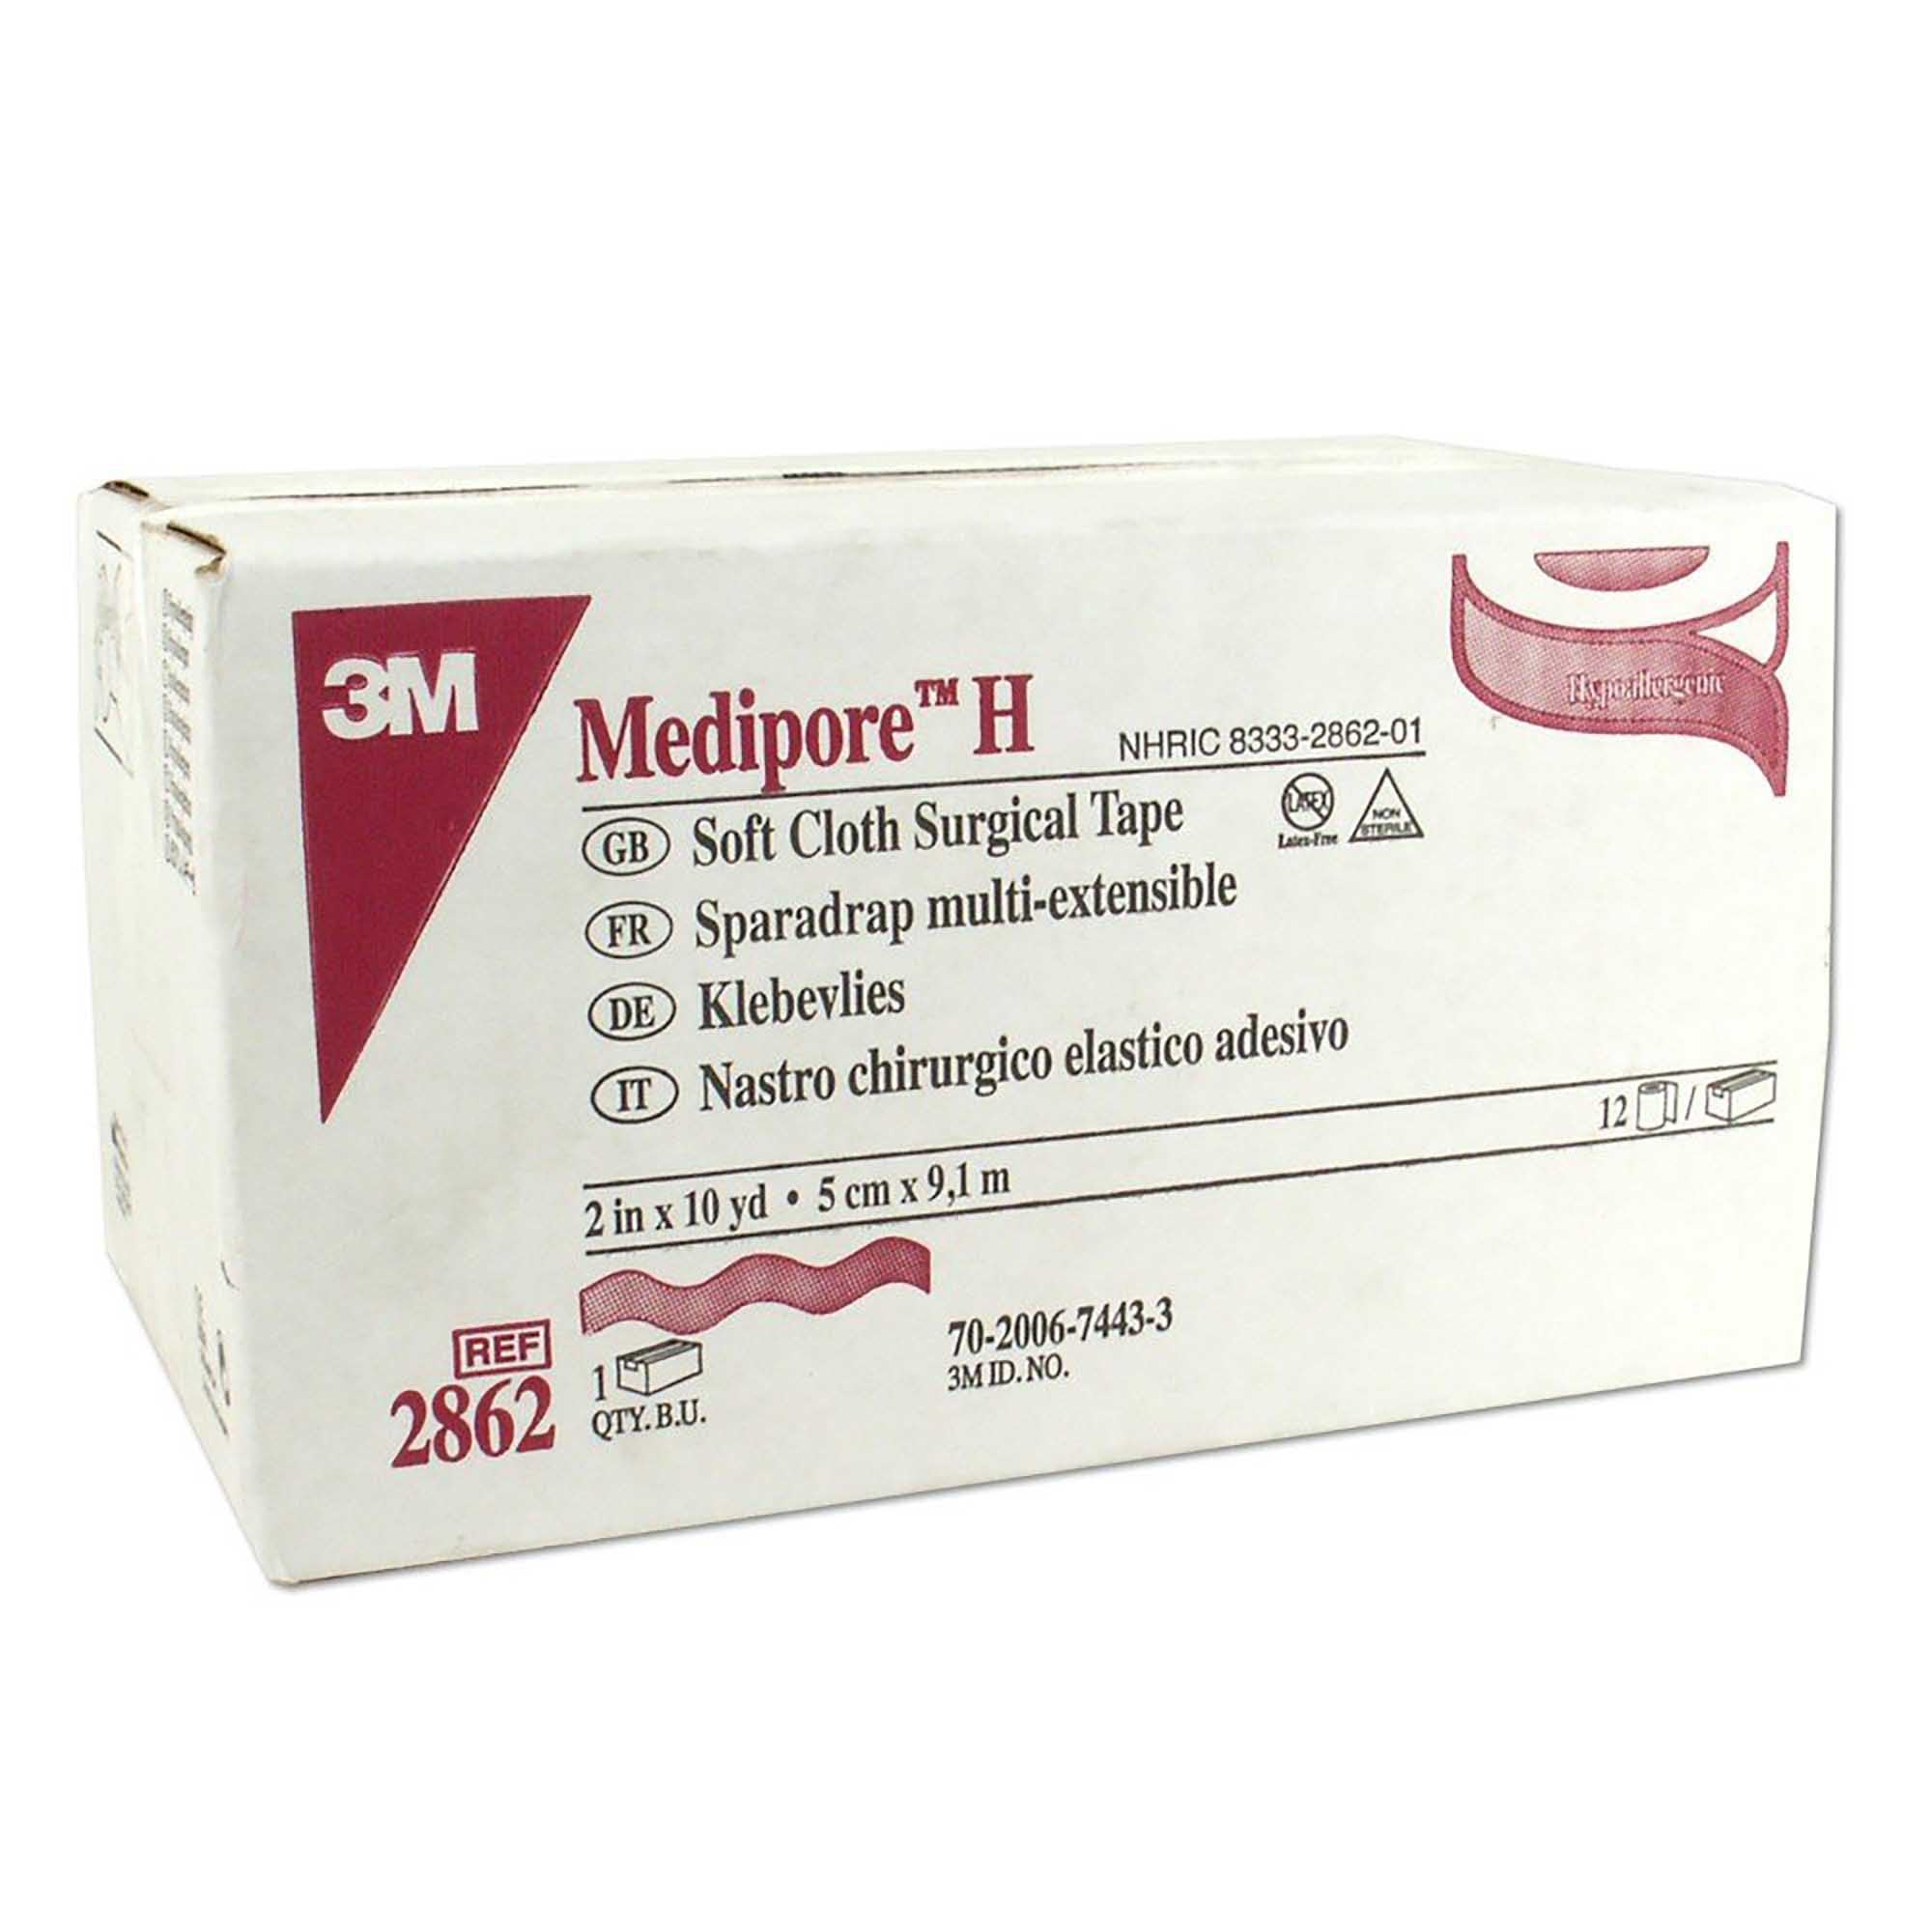 3M 2862 Medipore H Soft Cloth Surgical Tape 2 x 10 Yards - 2 Rolls